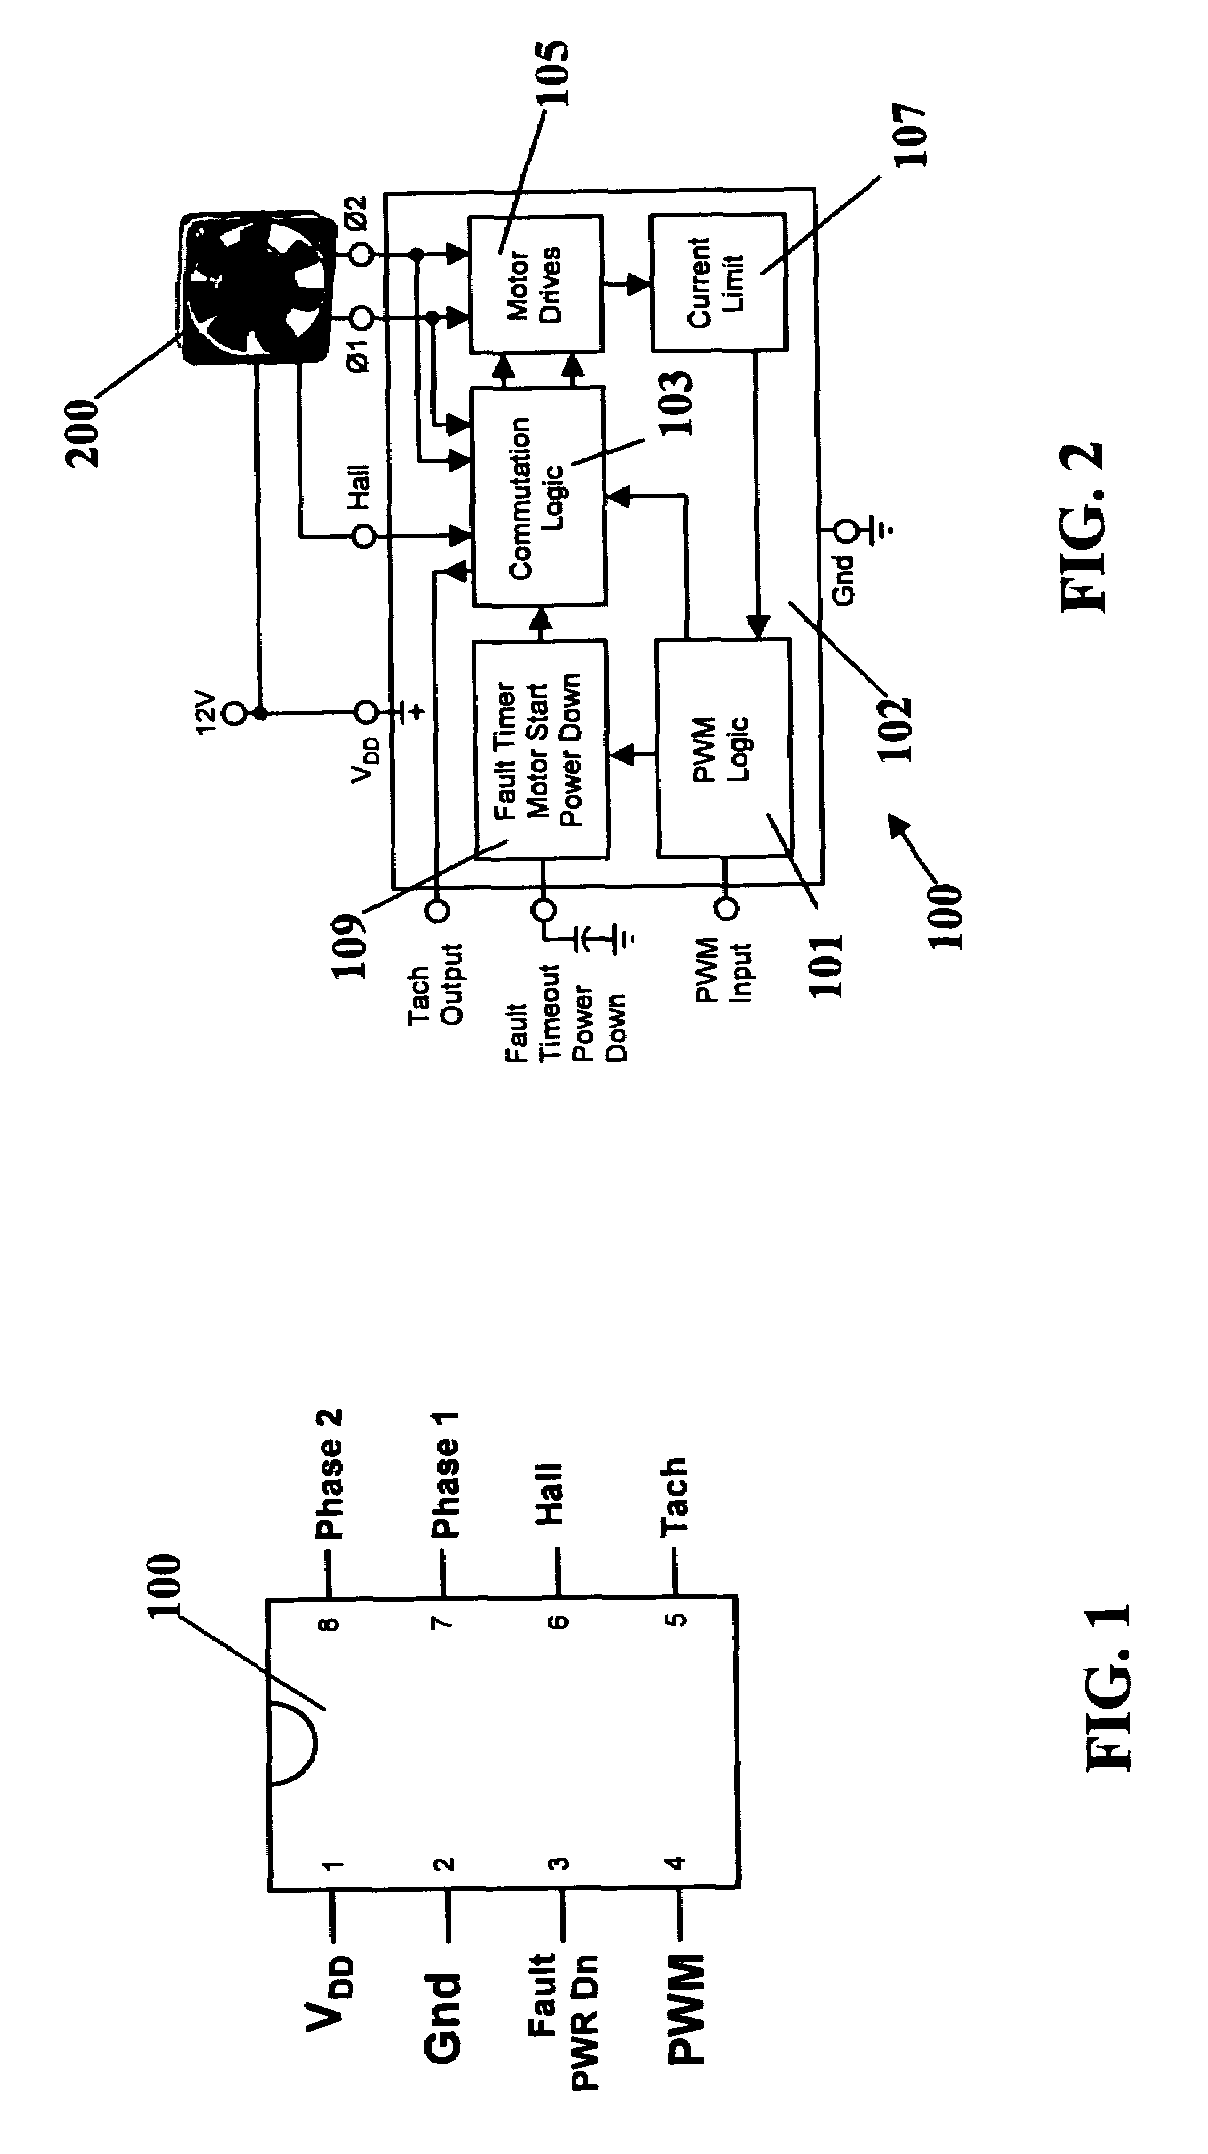 Controller arrangement with adaptive non-overlapping commutation